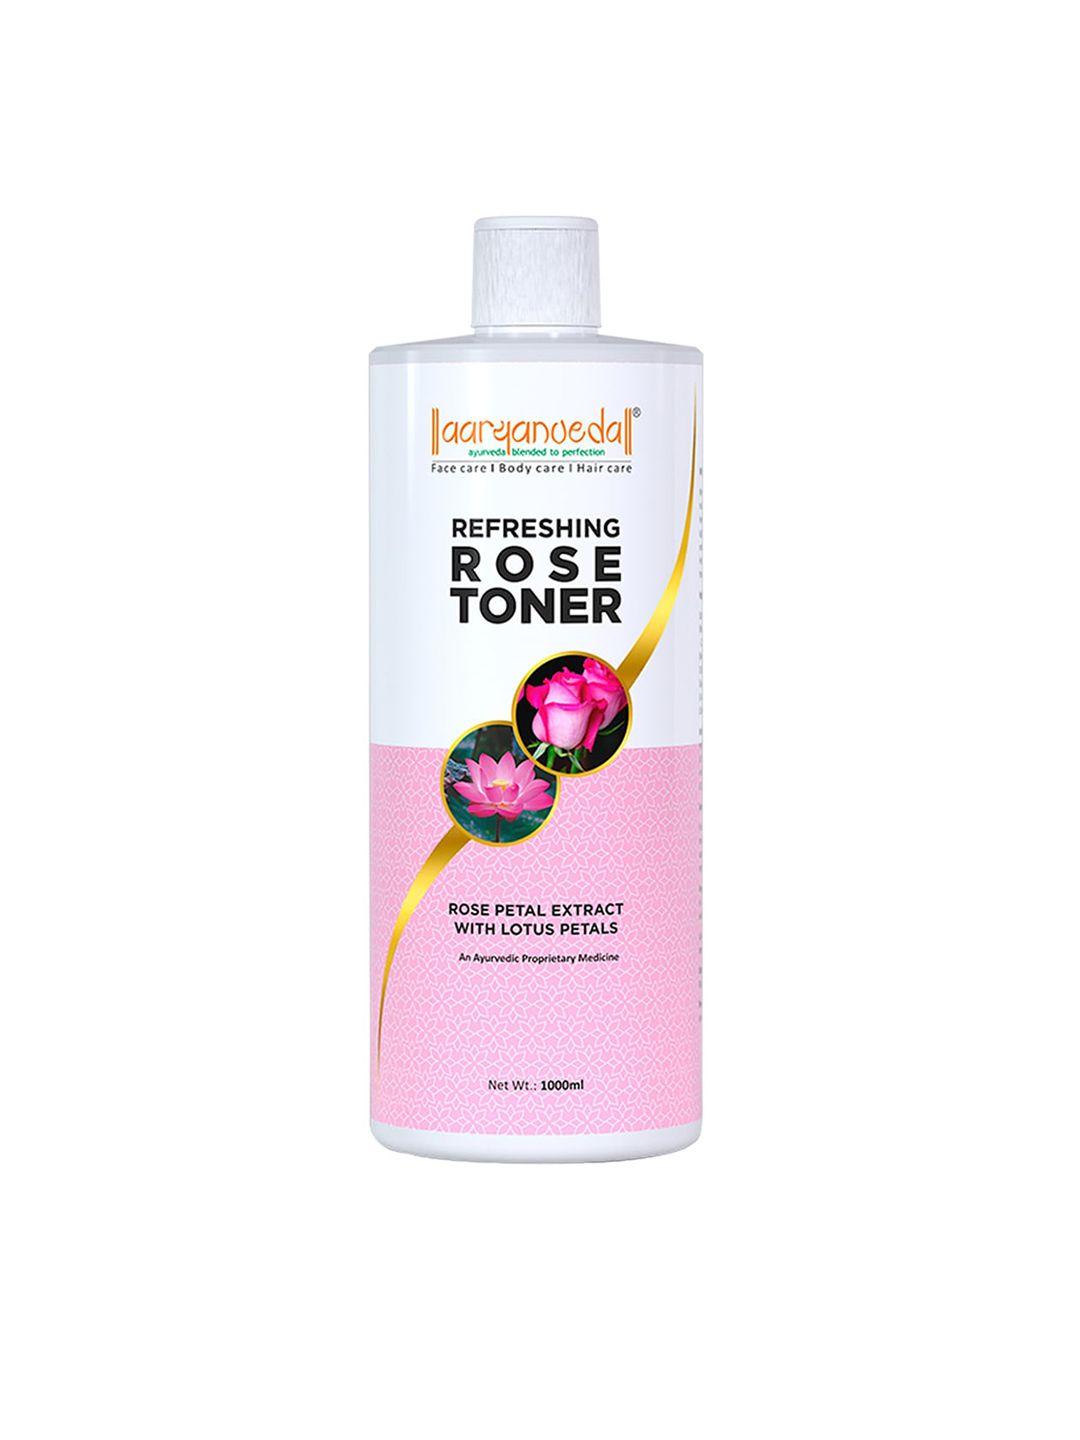 aryanveda face hydration rose toner for oil control & cleans pores - 1000 ml